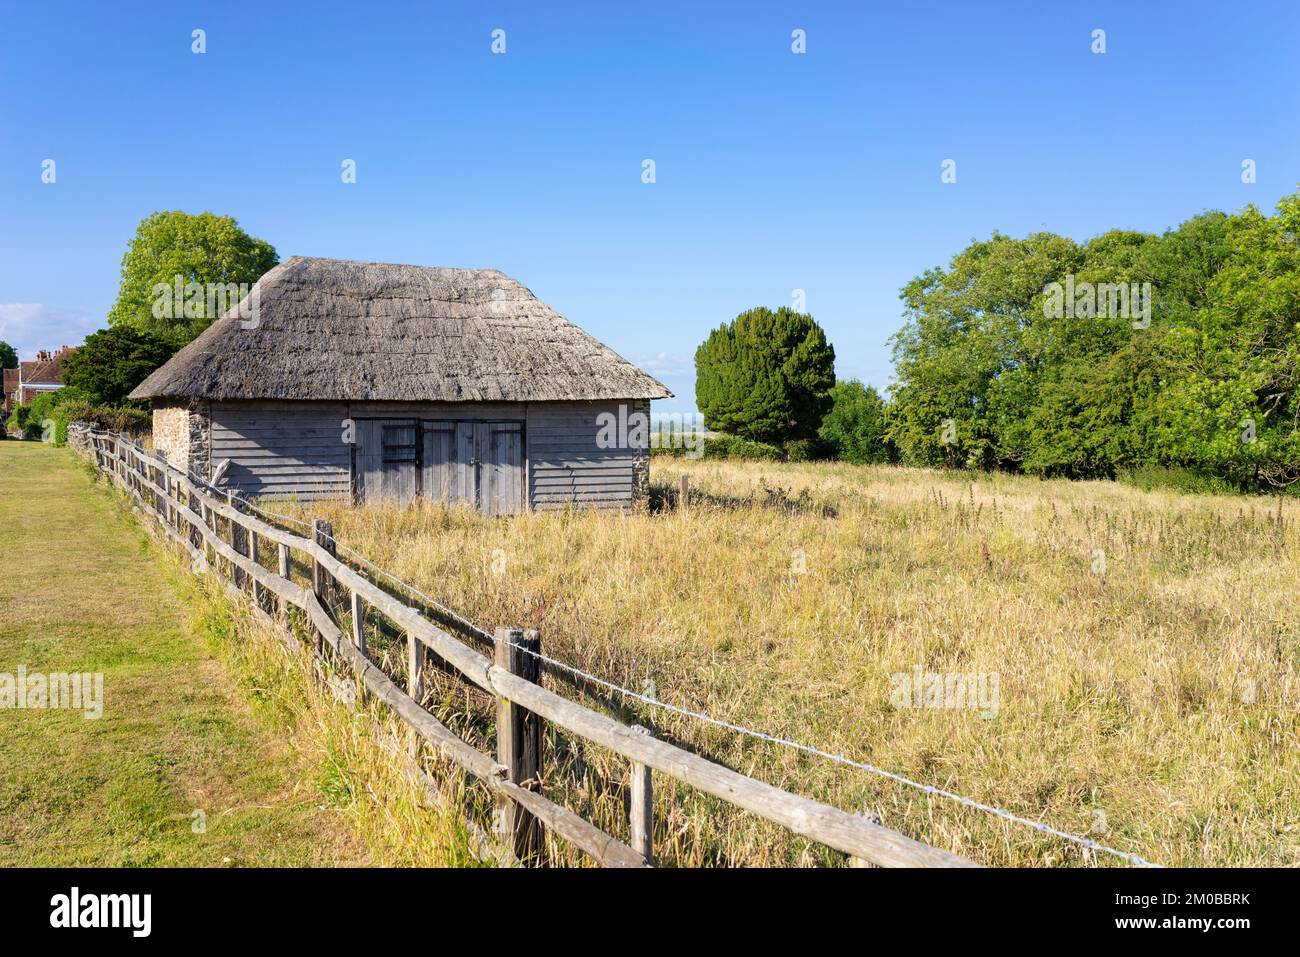 Winchelsea East Sussex Rookery Barn Winchelsea a Small Thatched barn stable or shed in a field  on Rookery lane Winchelsea Sussex England UK GB Europe Stock Photo